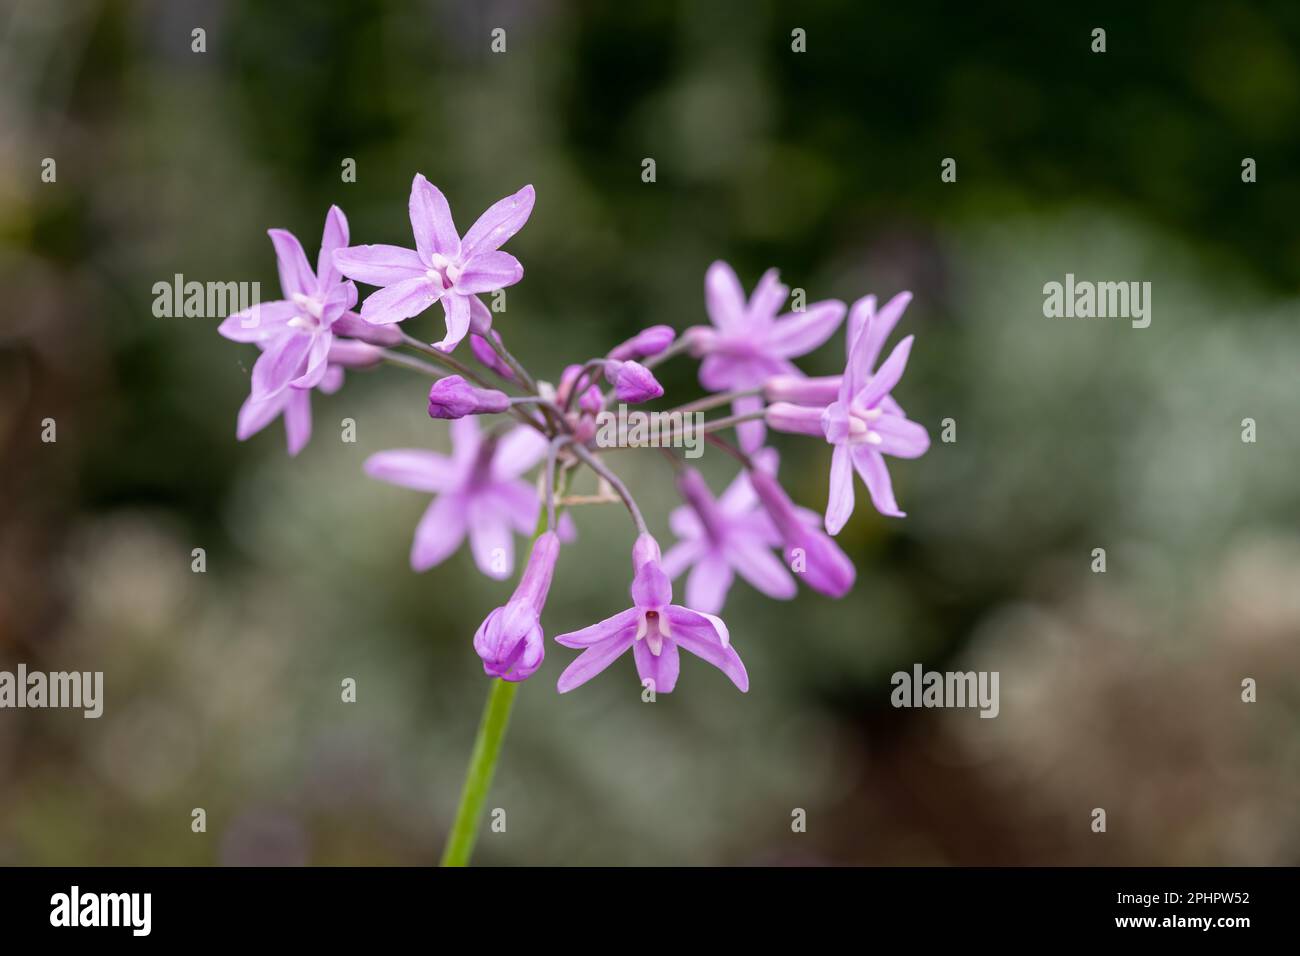 Close up of society garlic (tulbaghia violacea) flowers in bloom Stock Photo